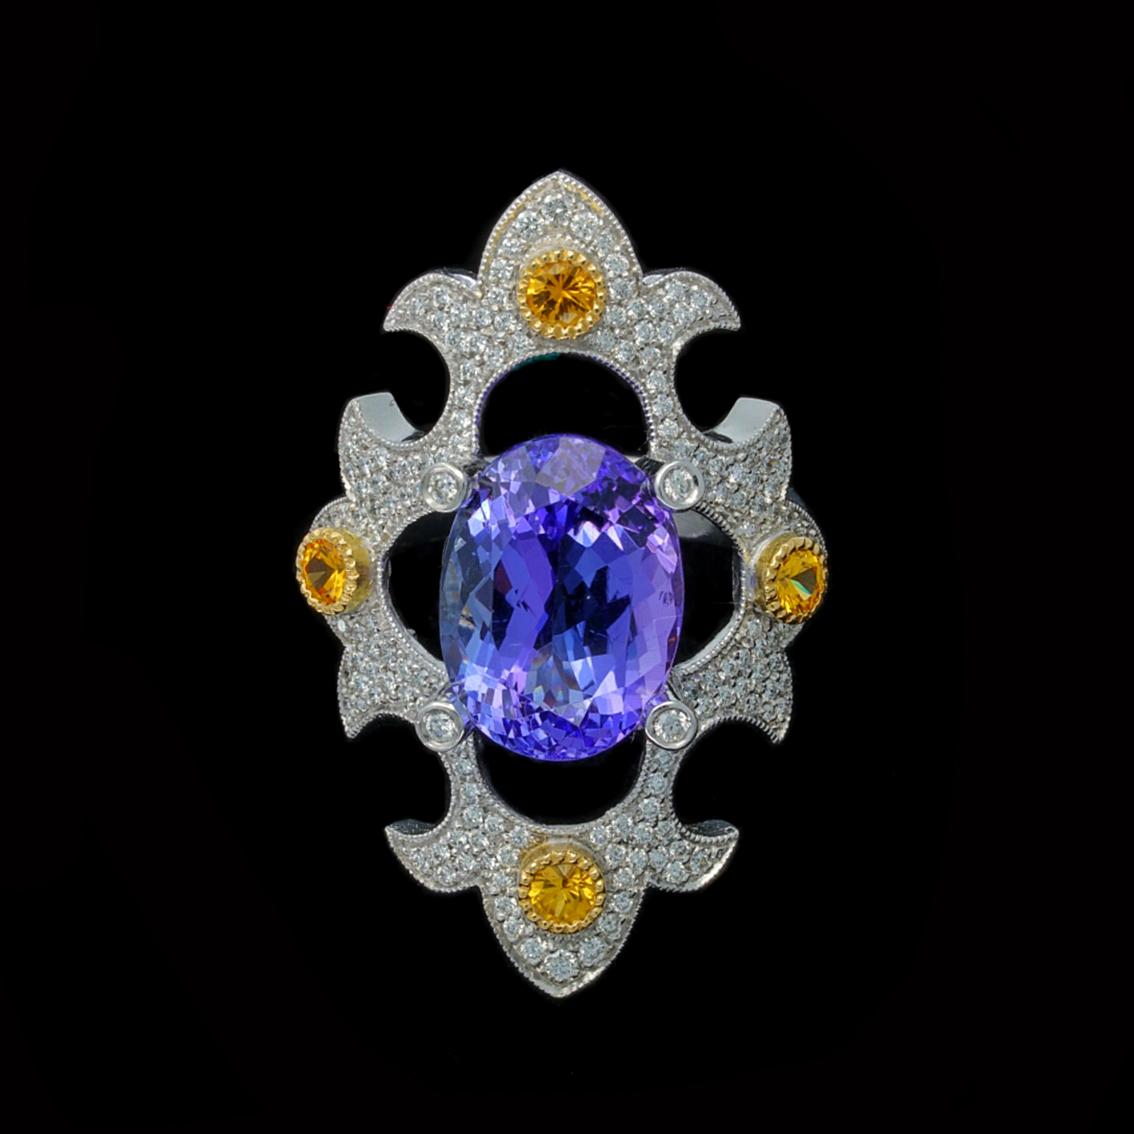 Mawenzi Princess Ring

Drawing upon Medieval ring profiles embellished with Byzantine detail, this decadent piece is named after the largest tanzanite ever found named the Mawenzi. Tanzanite is an exceptionally rare gemstone, much more scarce than